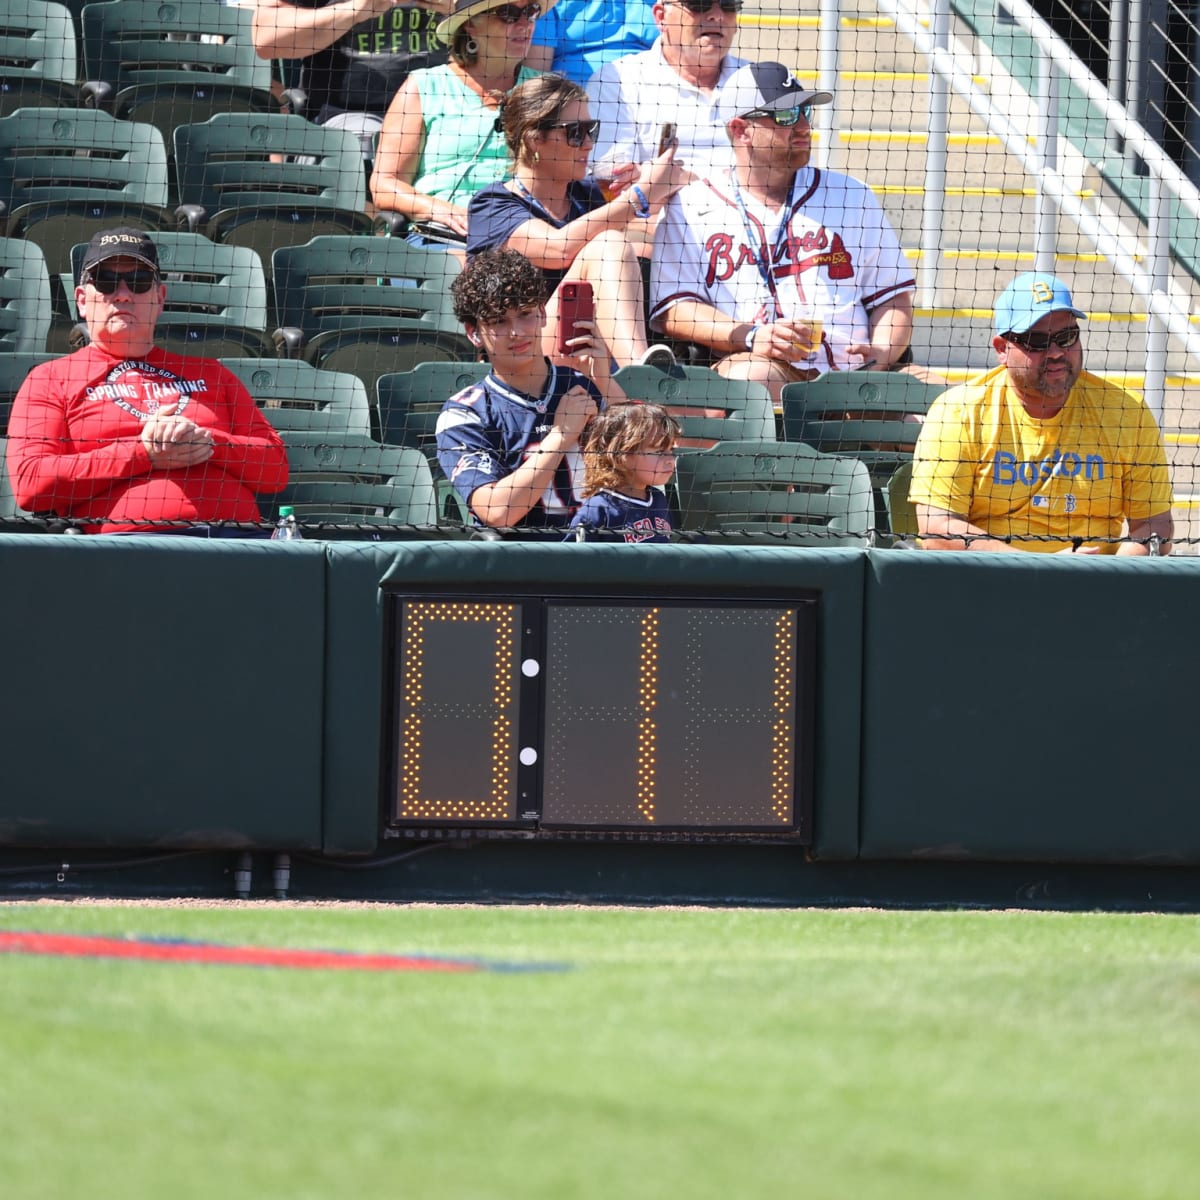 On the clock: Positive reviews for pitch clocks in minors